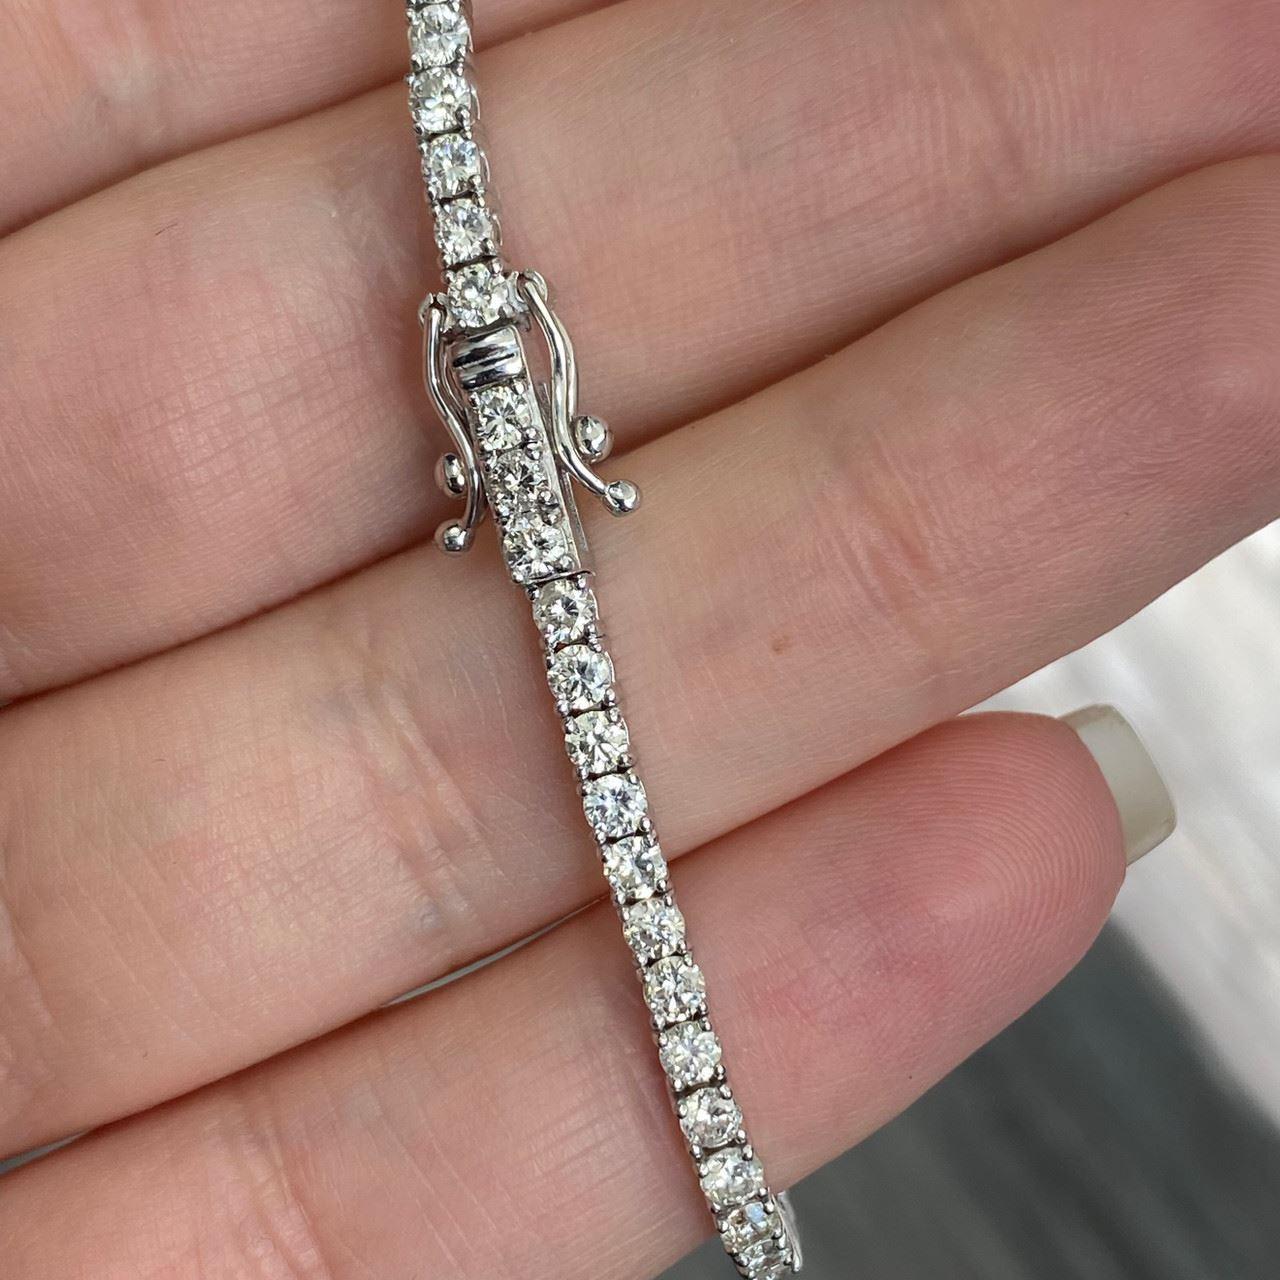 Contemporary 14k White Gold Diamond Tennis Bracelet Weighing 3.85ctw For Sale